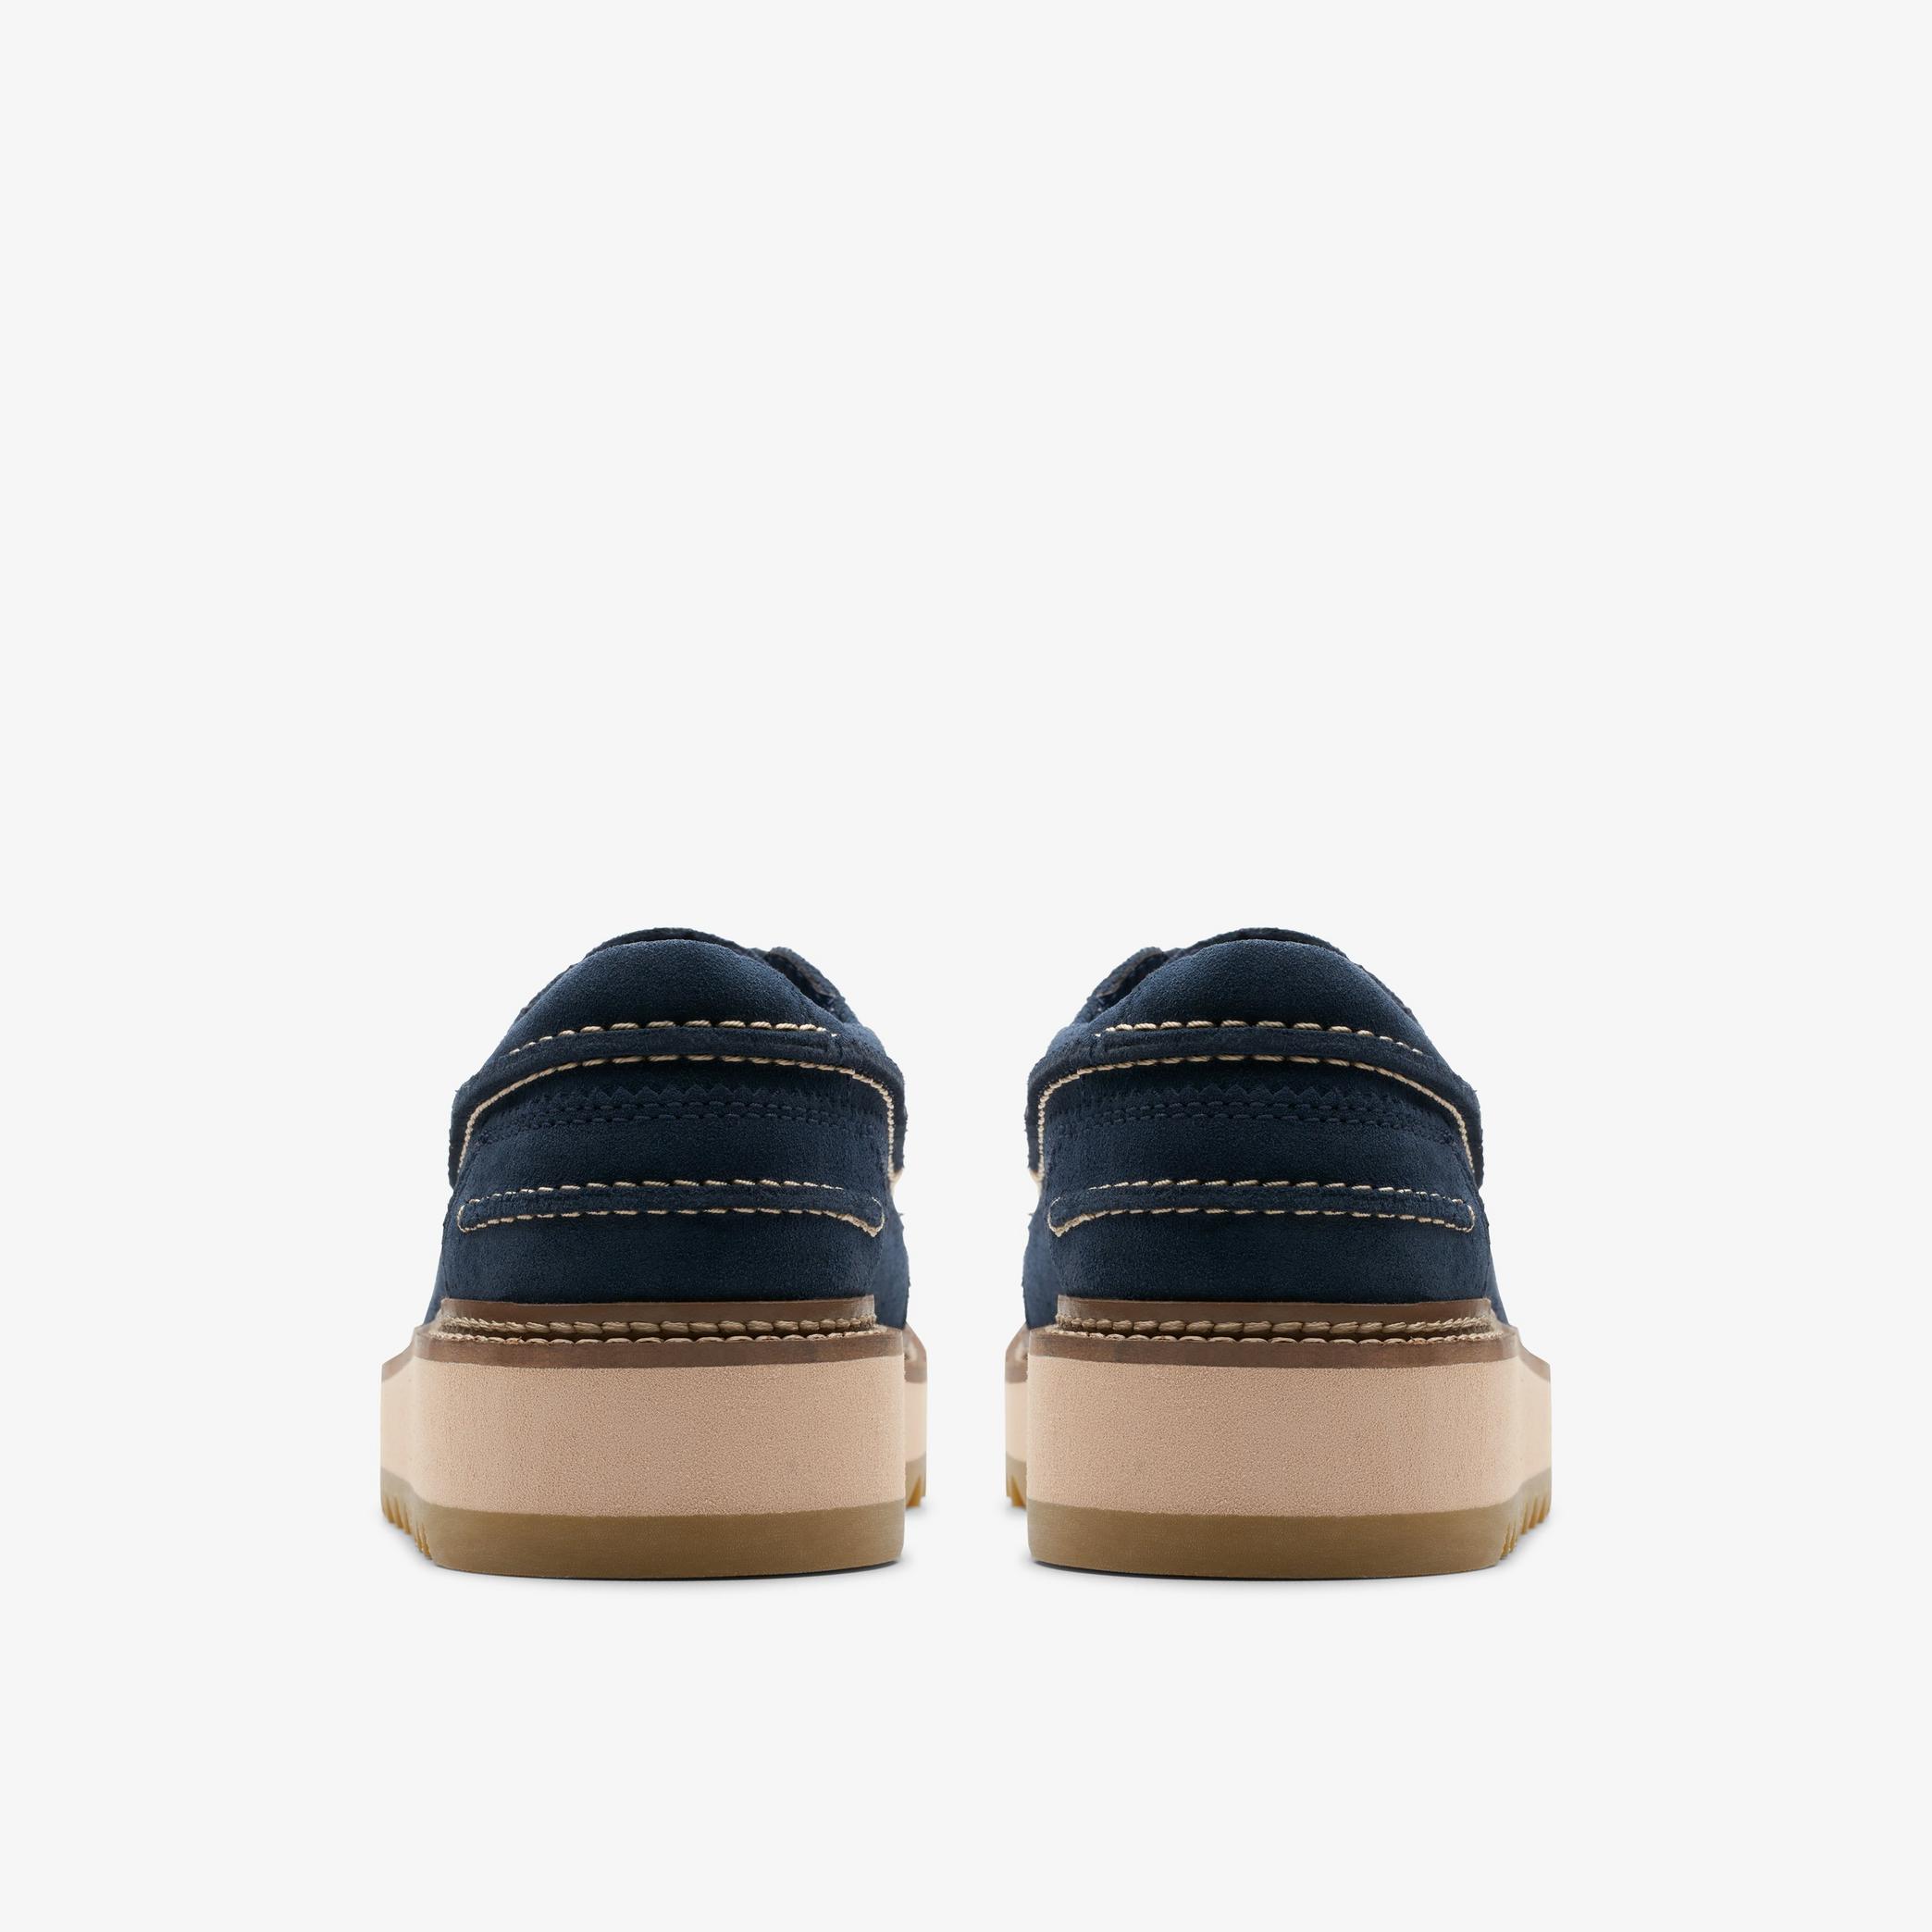 Clarkhill Lace Navy Suede Moccasins, view 5 of 6